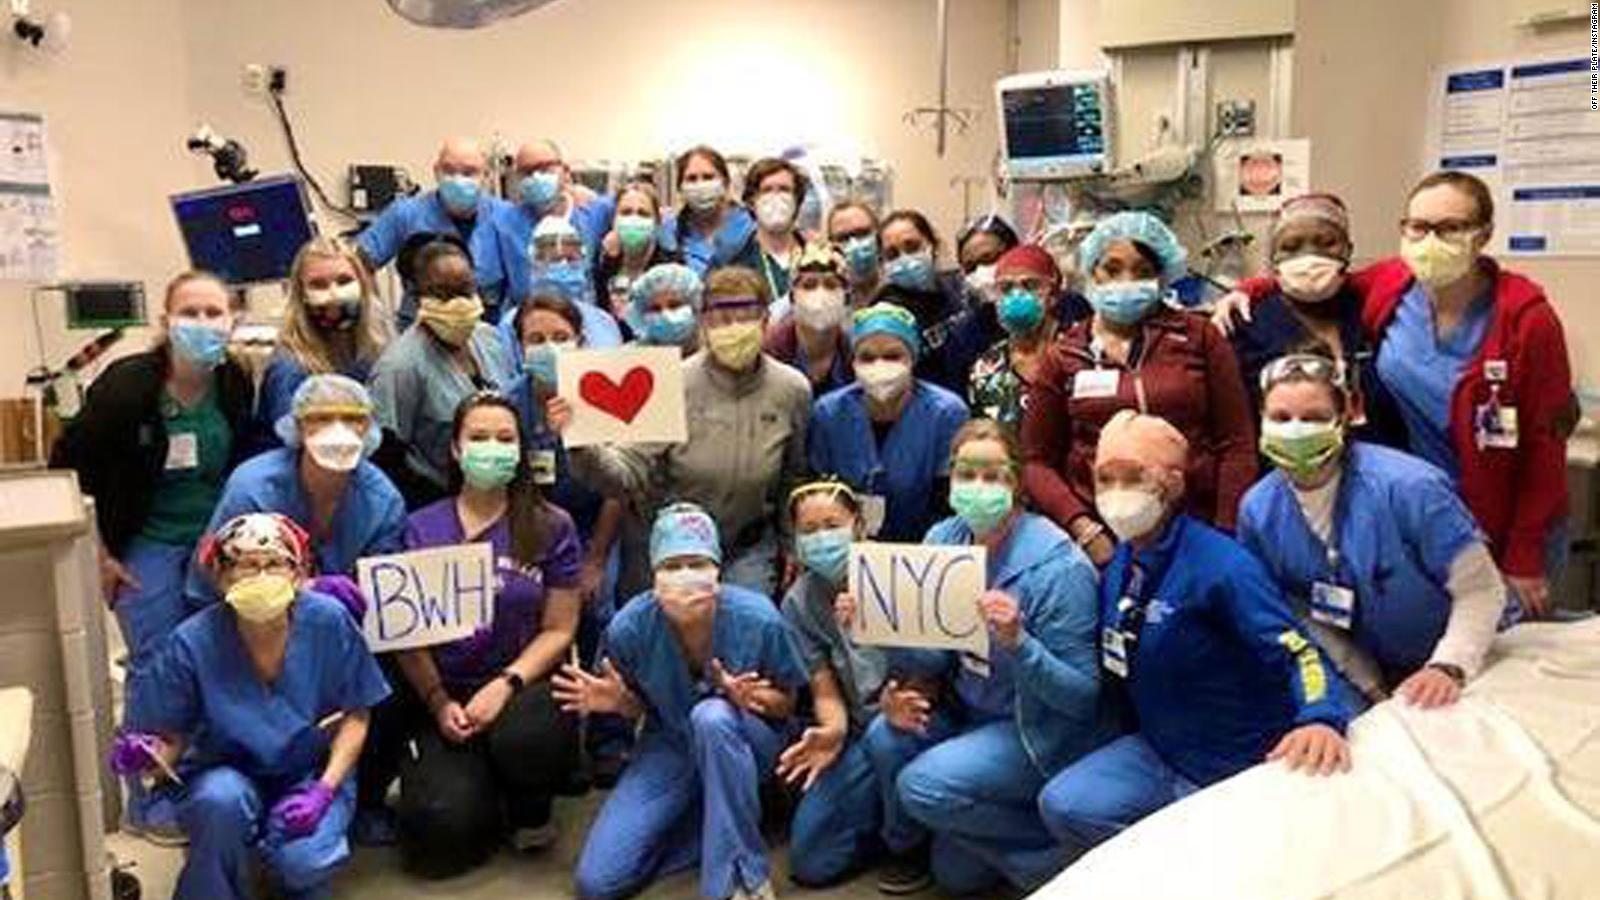 Nurses at Brigham and Women's Hospital in Boston raised money to send meals to Mt. Sinai Queens and Elmhurst Hospitals in New York.